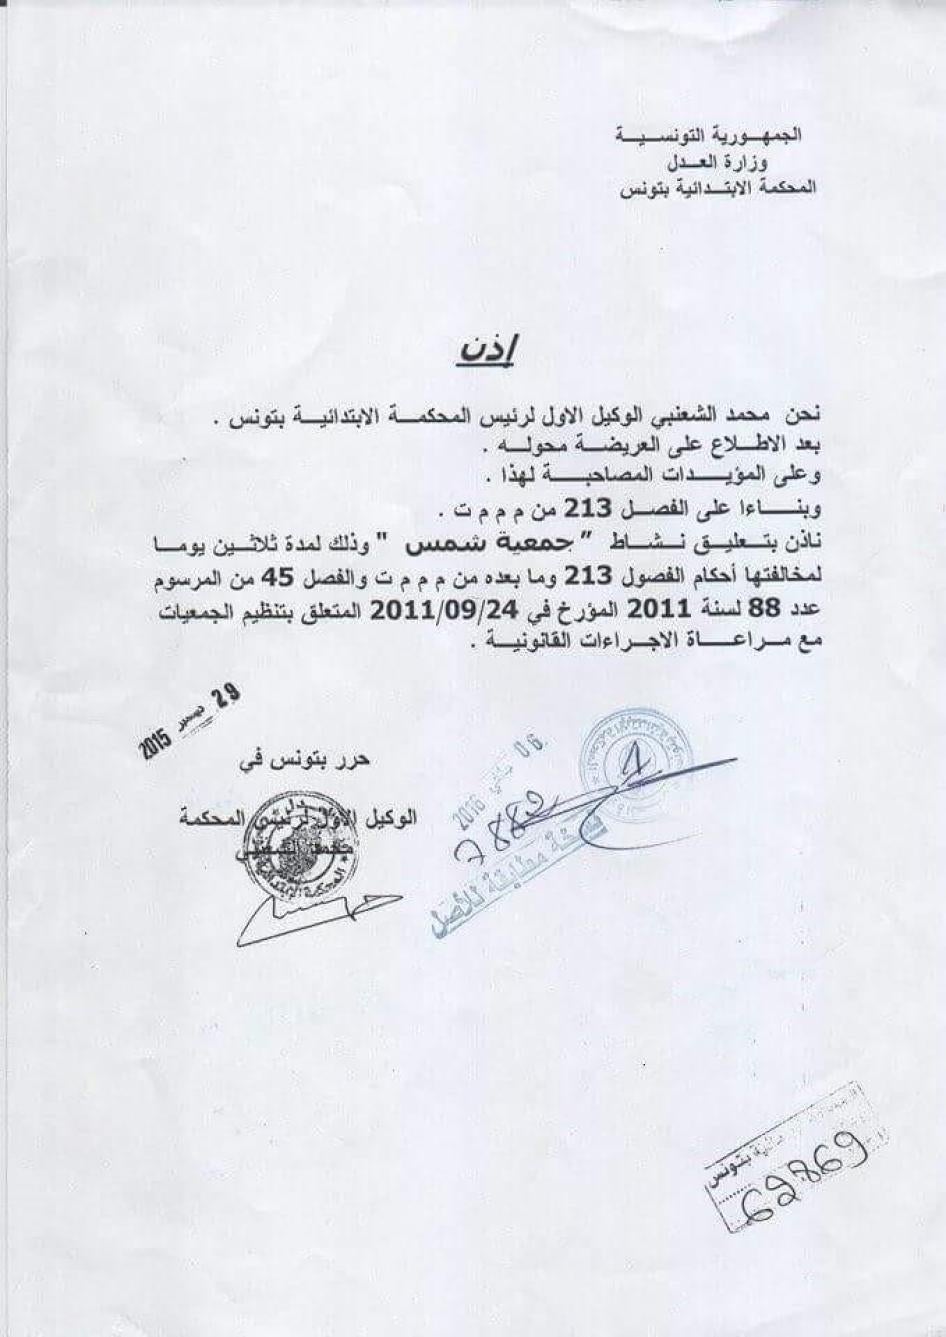 A copy of an authorization of suspension of Chams association, signed by the first deputee of the Tunis Court Judge, Mohamed Chaanebi, on December 29, 2015.